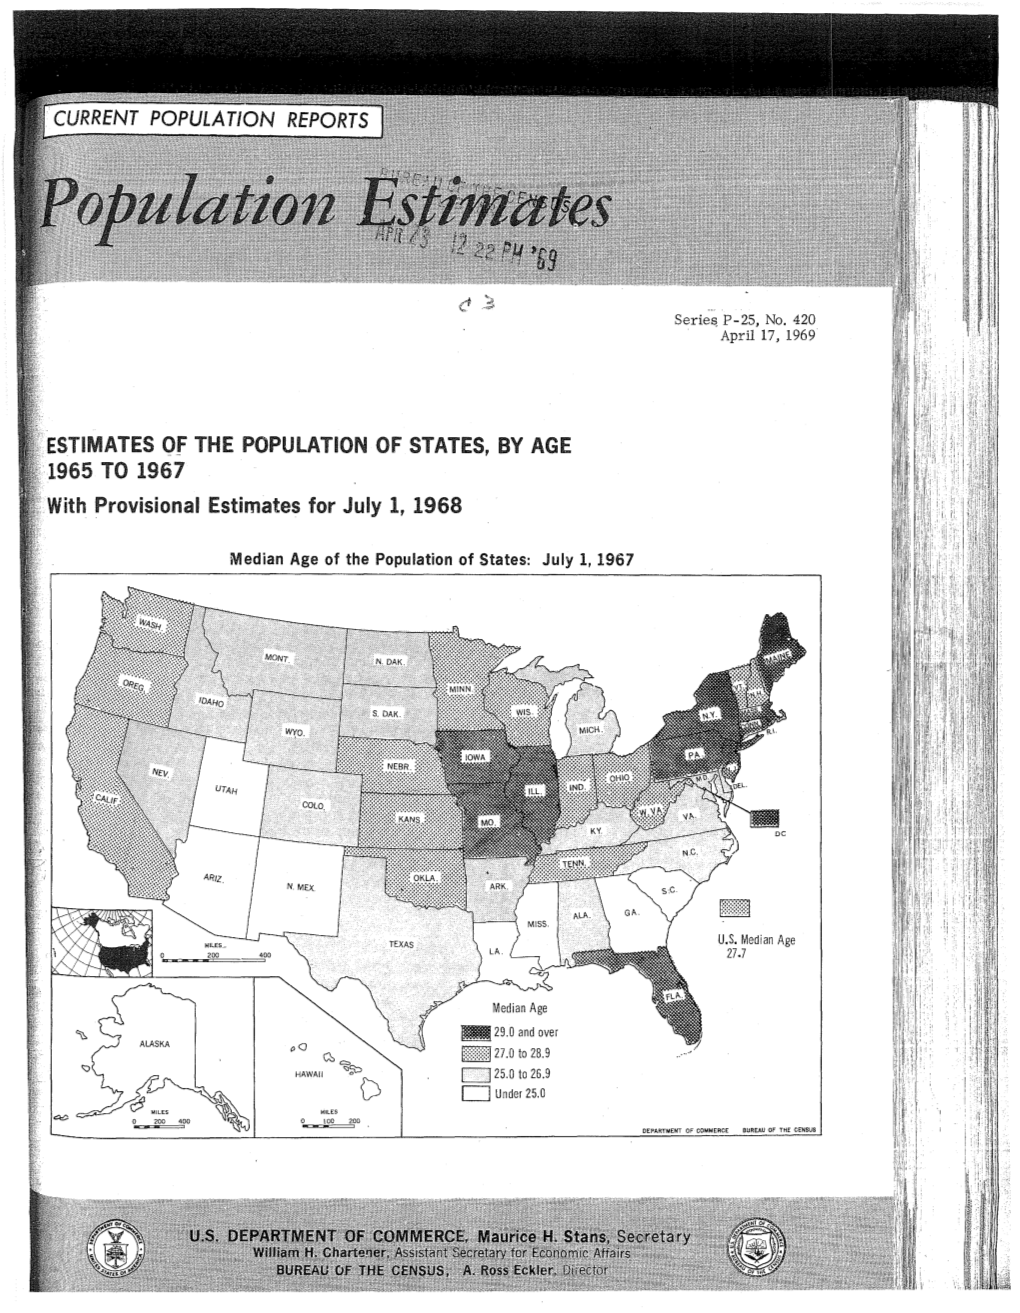 ESTIMATES Qf the POPULATION of STATES, by AGE 1965 to 1967 with Provisional Estimates for July 1, 1968